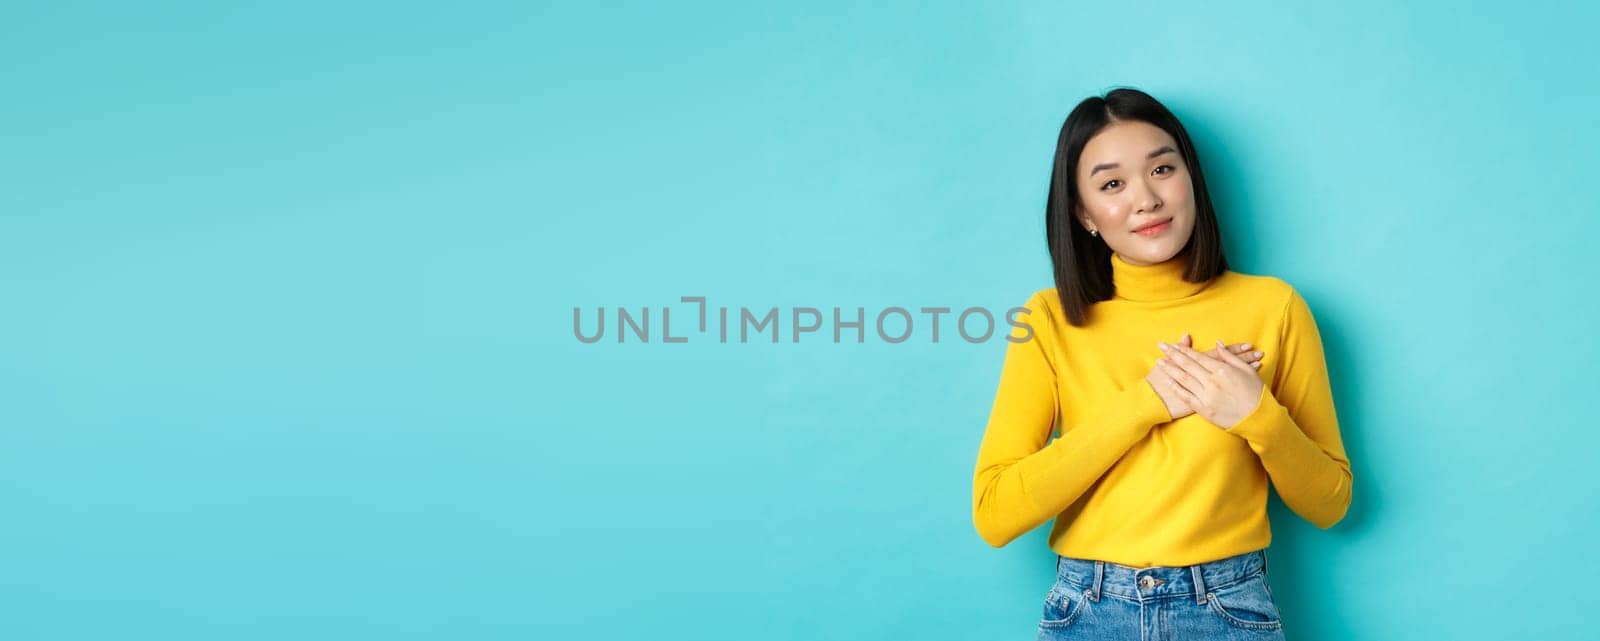 Portrait of beautiful heartfelt woman holding hands on heart, smiling and listening compassionate, standing over blue background in yellow pullover.